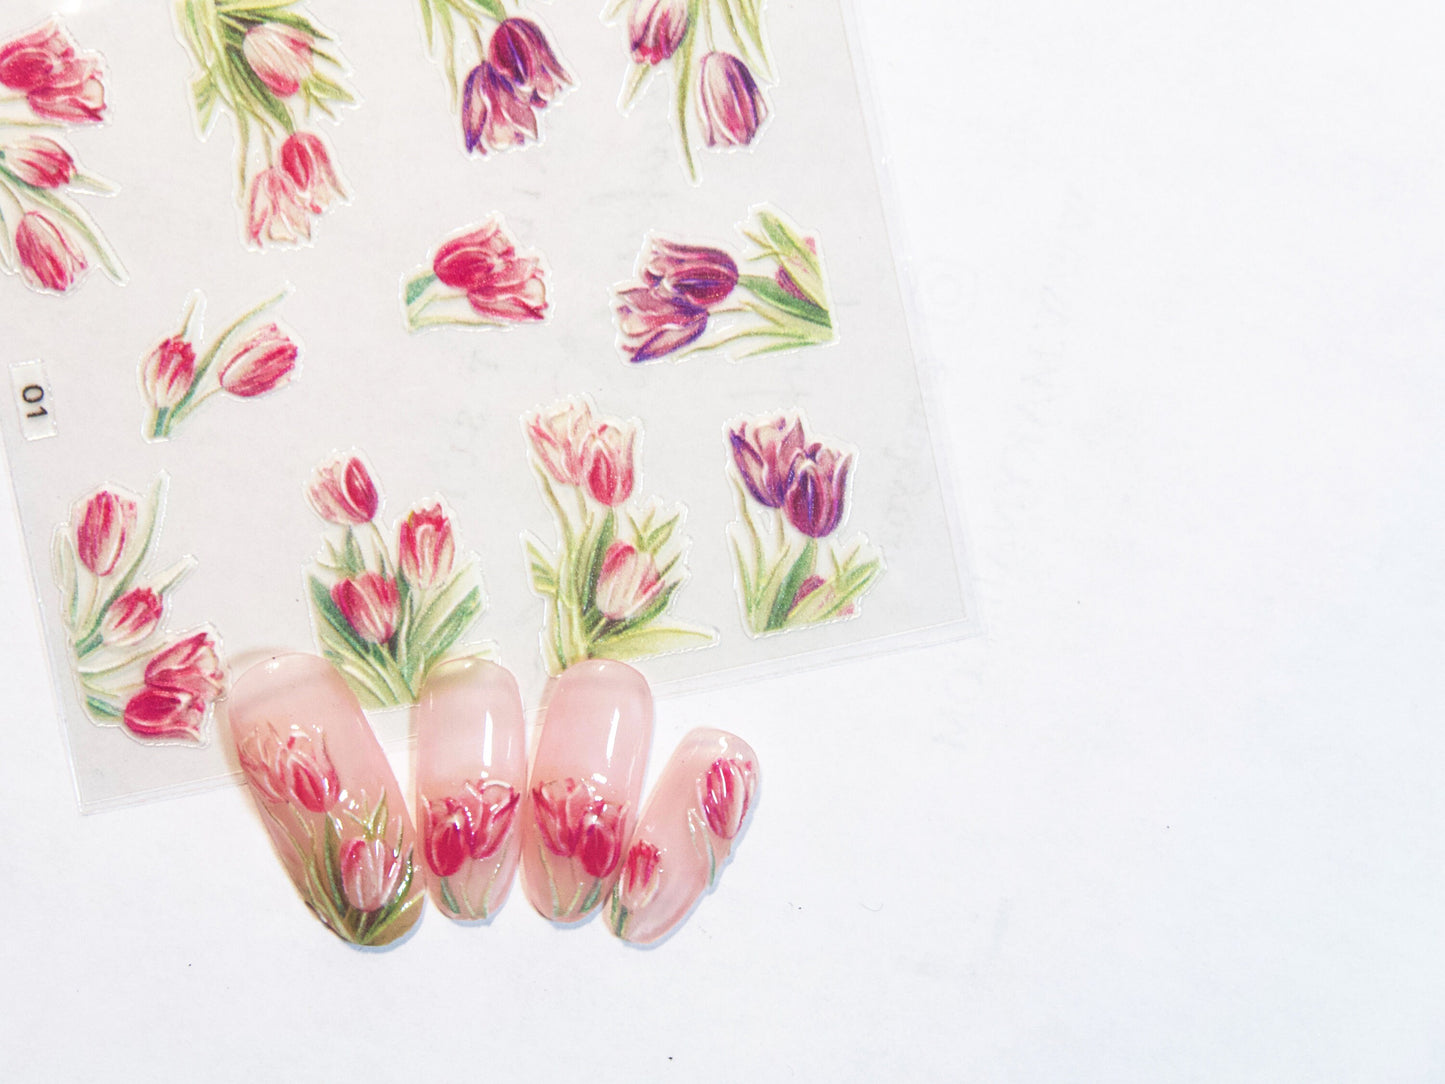 5D Flower Series Embossed nail sticker/Peel off 3D Floral Nail adhesive/Lavender, sakura, hydrangea, white lace, butterfly, tulip sticker